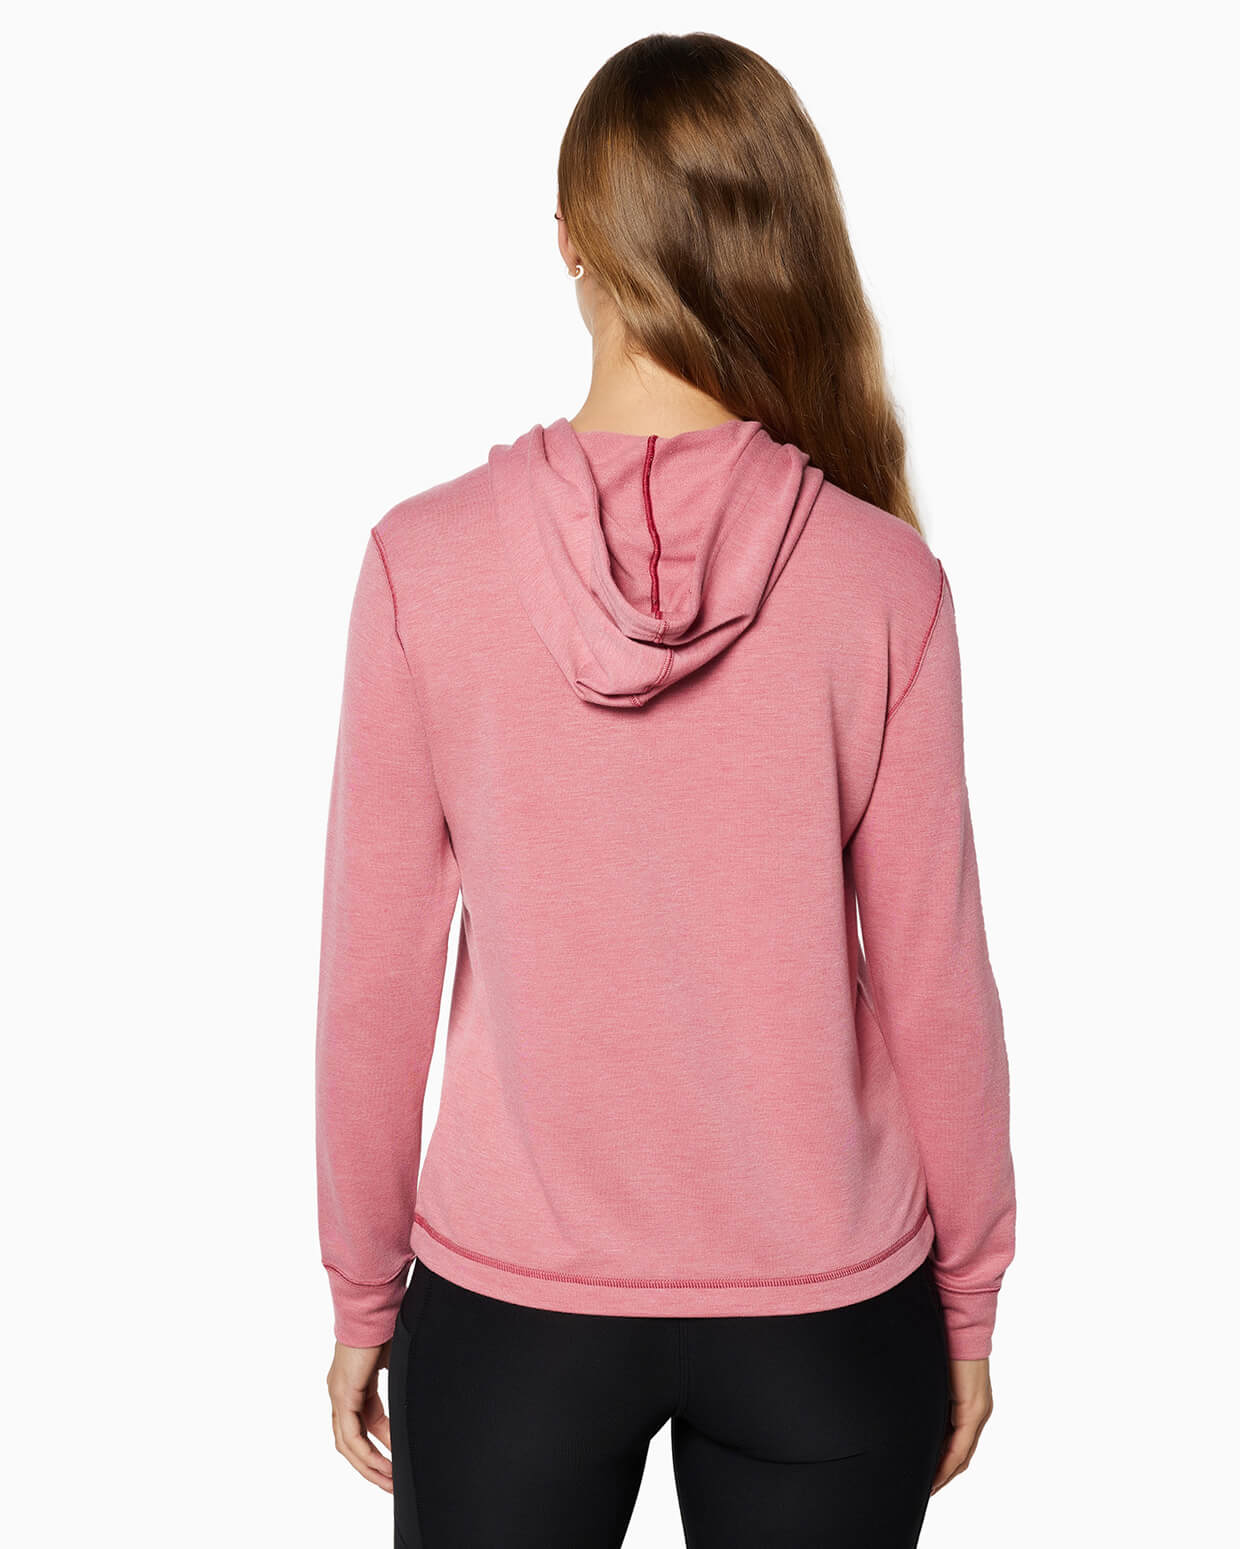 Sykooria Women's Zip Up Hoodie with Pockets and France